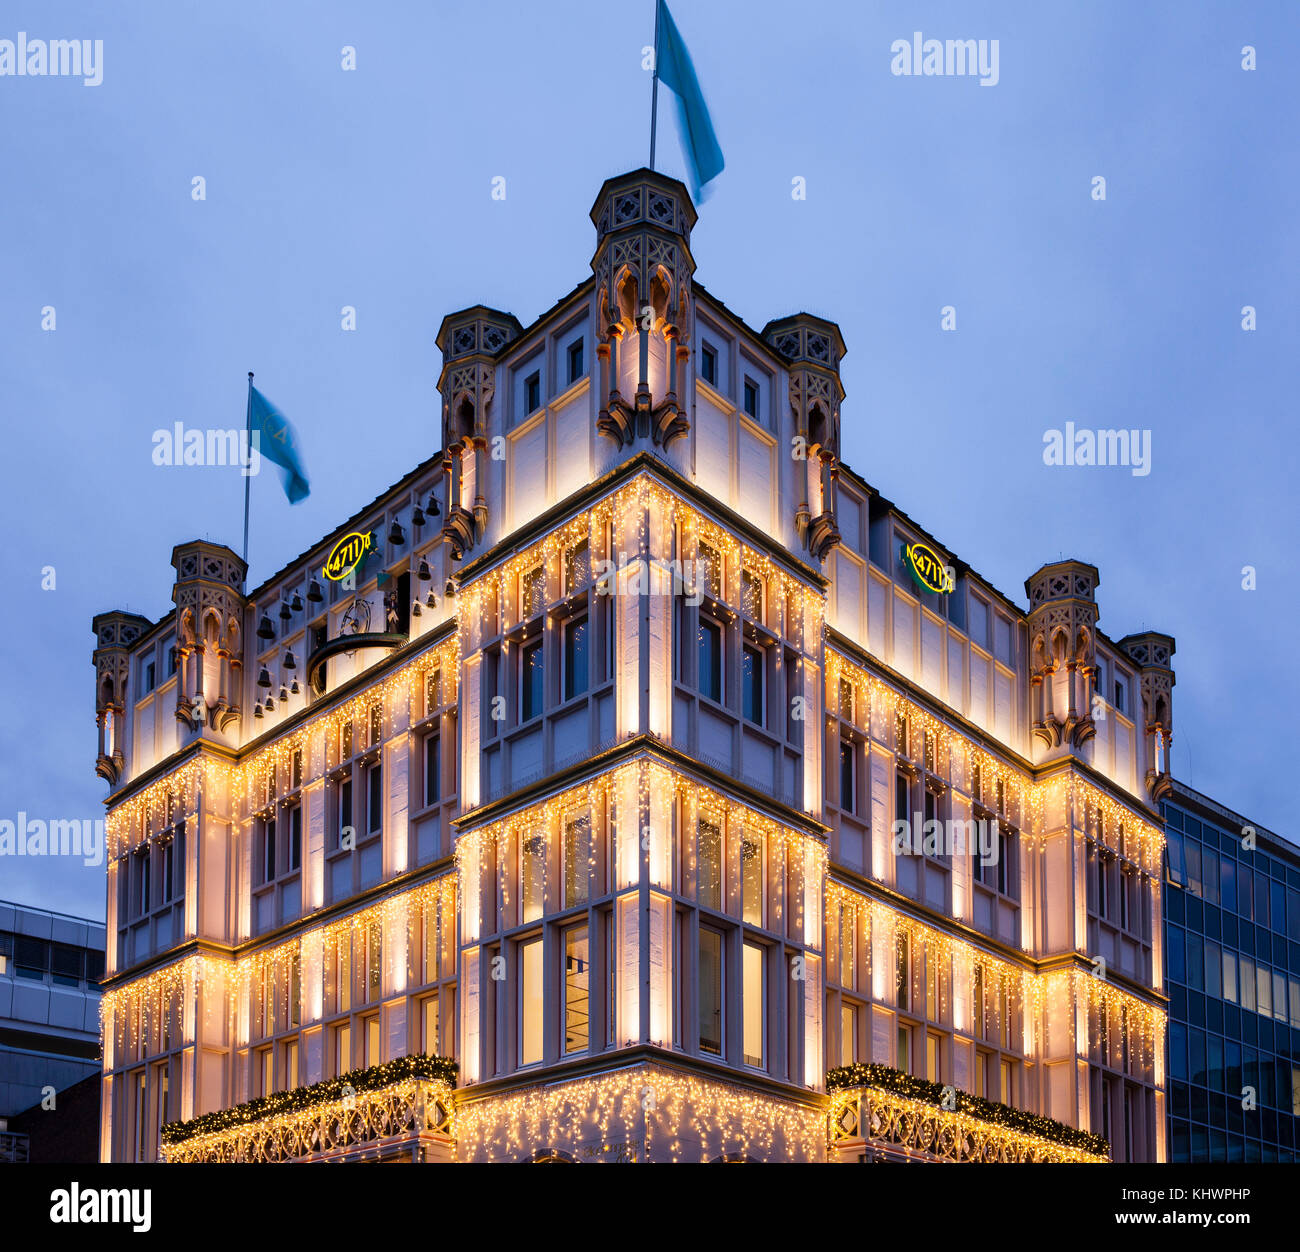 Germany, Cologne, the 4711 house at the Glockengasse, ancestral home of the perfume factory Muelhens, illumination during christmas time.  Deutschland Stock Photo